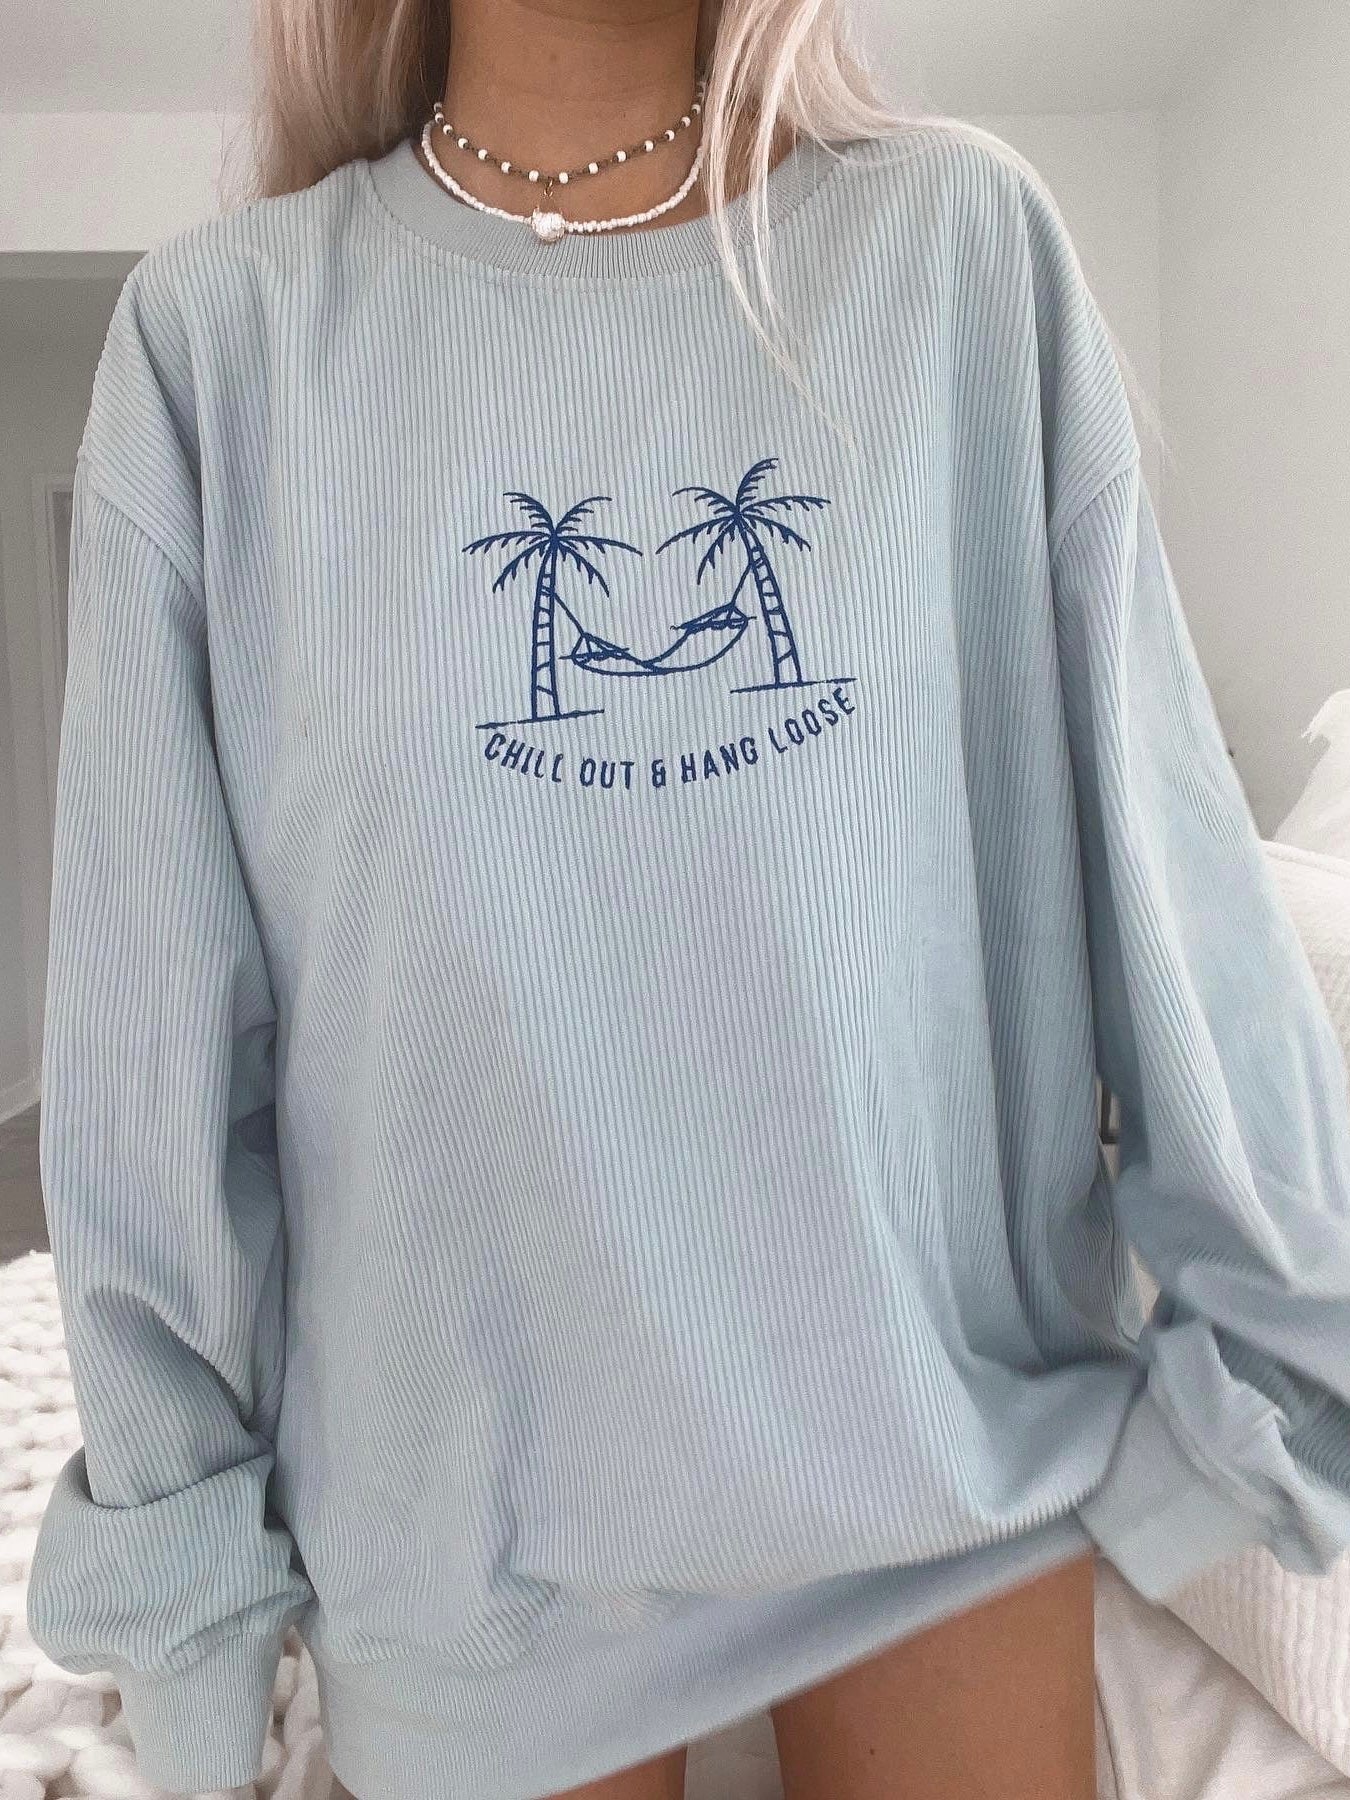 Chill Out and Hang Loose Corduroy Crewneck - Sunkissedcoconut